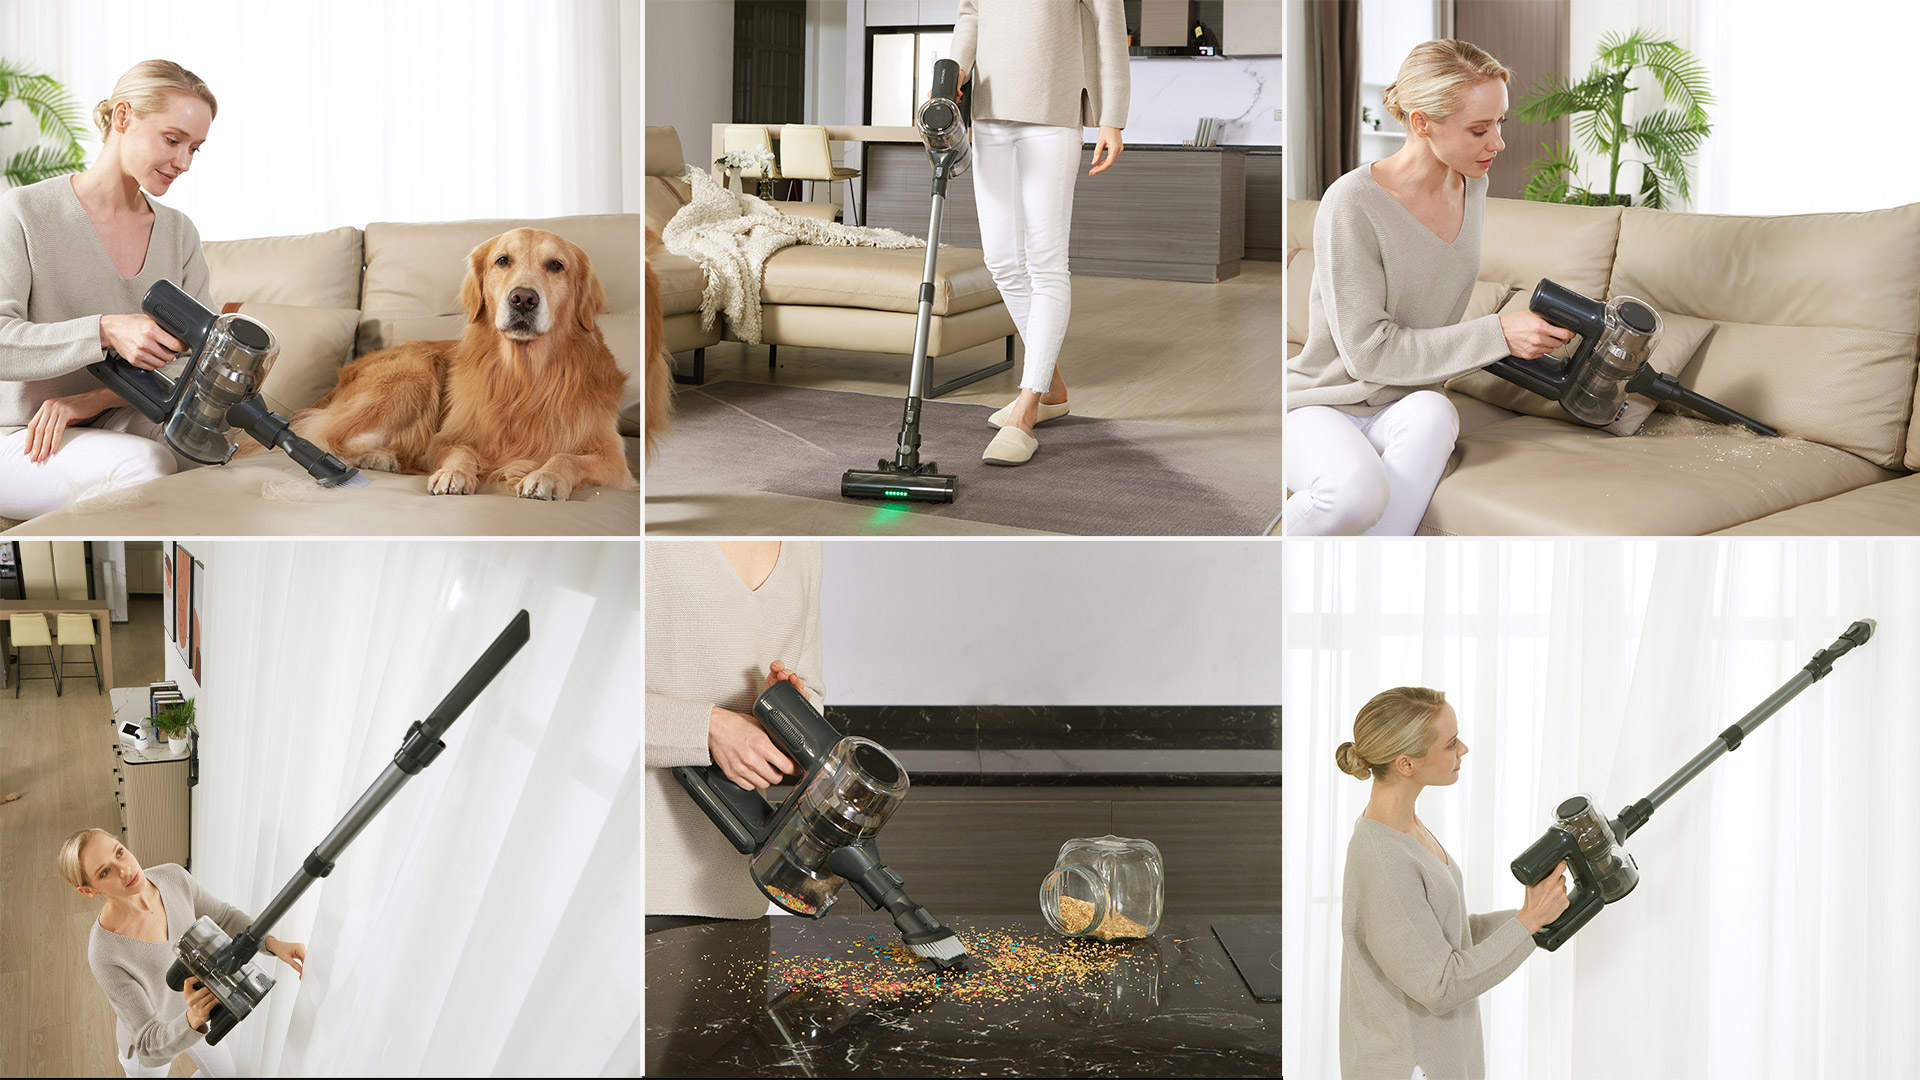 Gadgets: Proscenic OptCleanP12 cordless stick vacuum helps you see, reach  trouble spots